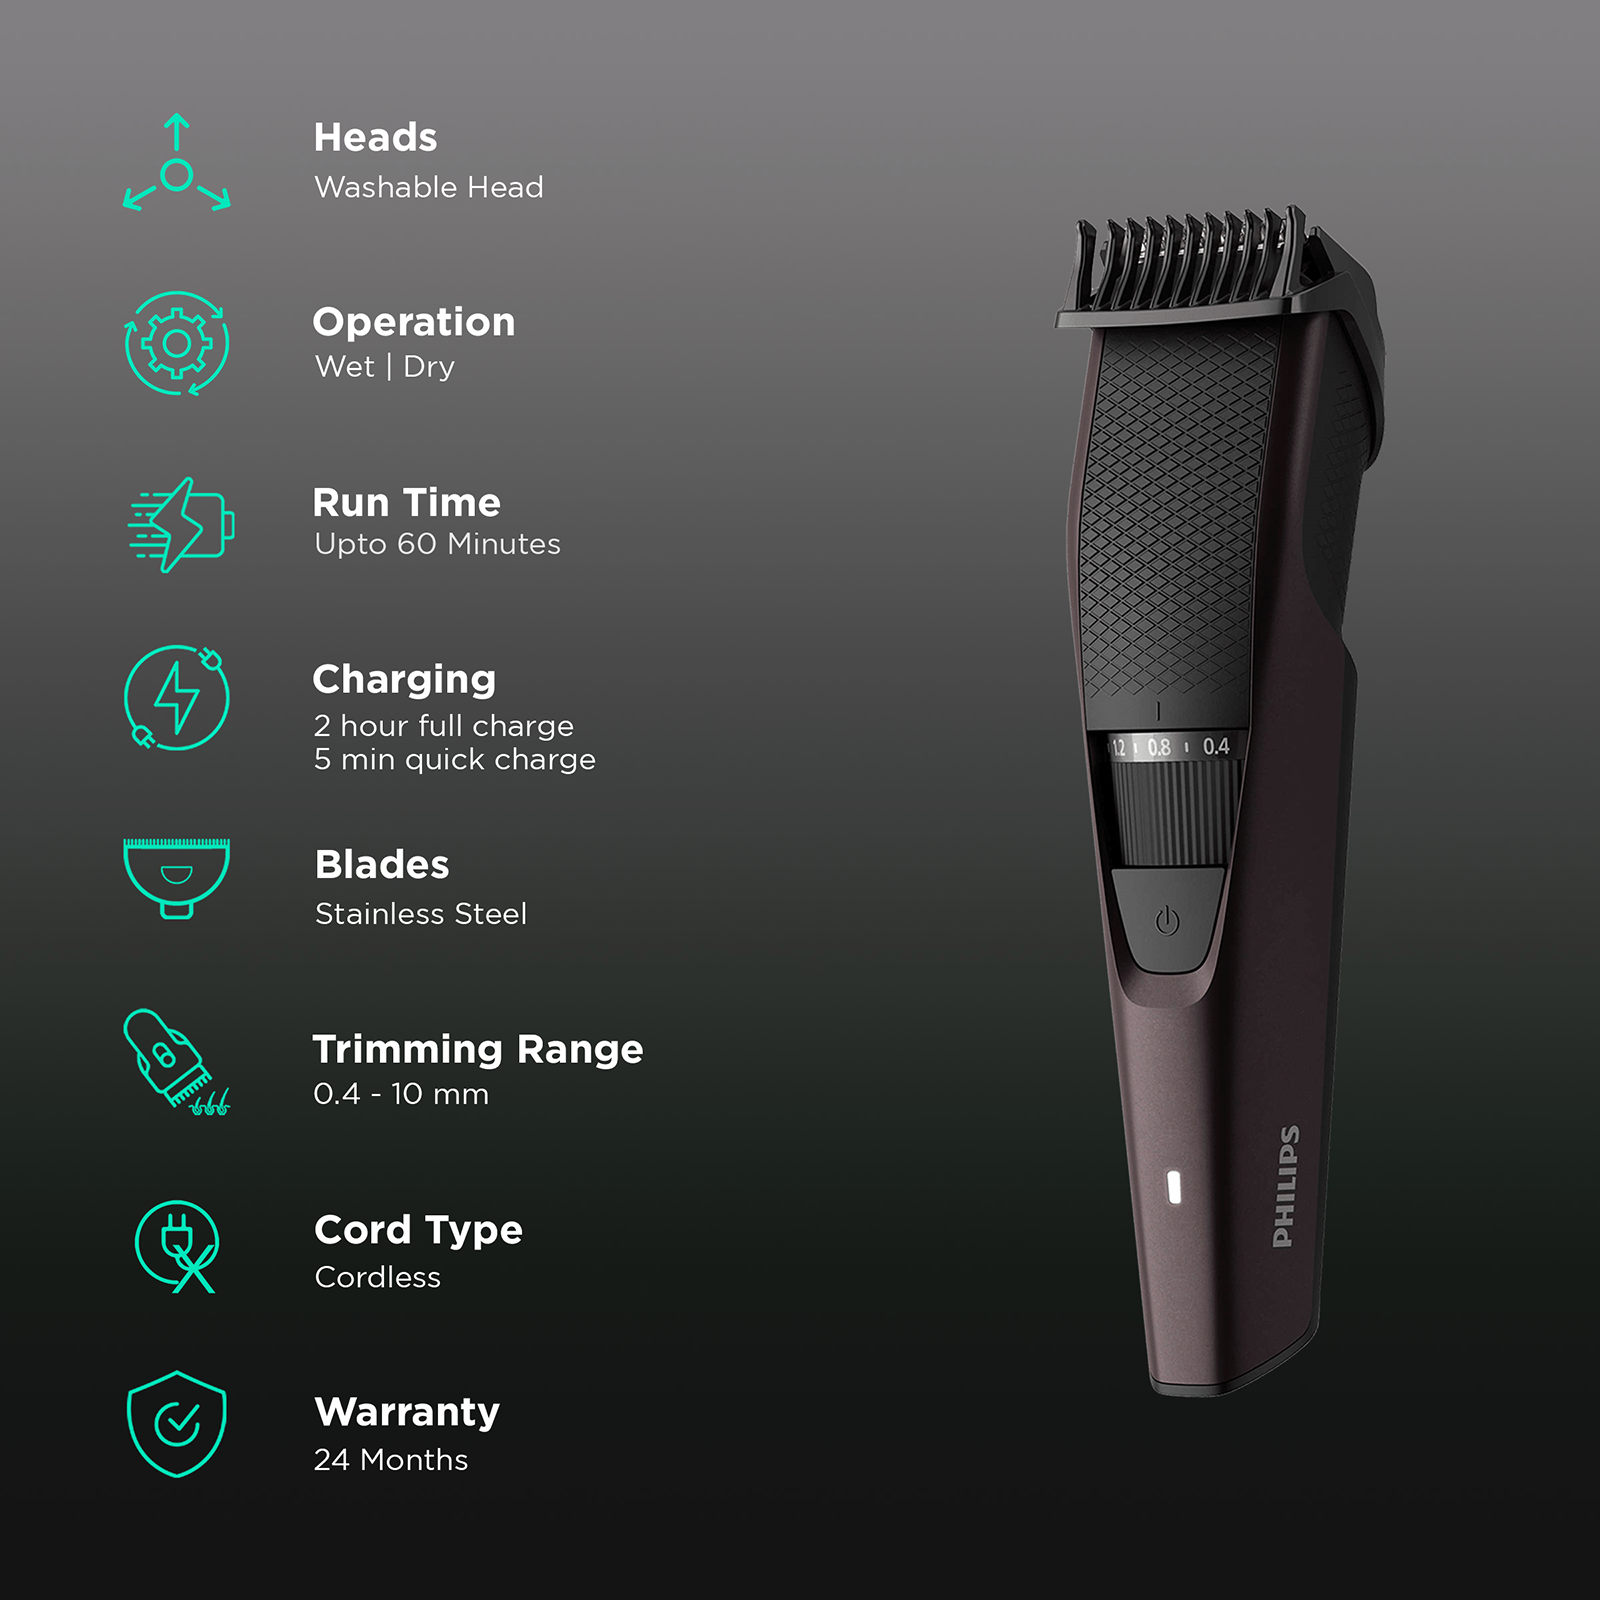 PHILIPS Beardtrimmer series 3000 Trimmer 60 min Runtime 10 Length Settings  Price in India - Buy PHILIPS Beardtrimmer series 3000 Trimmer 60 min  Runtime 10 Length Settings online at